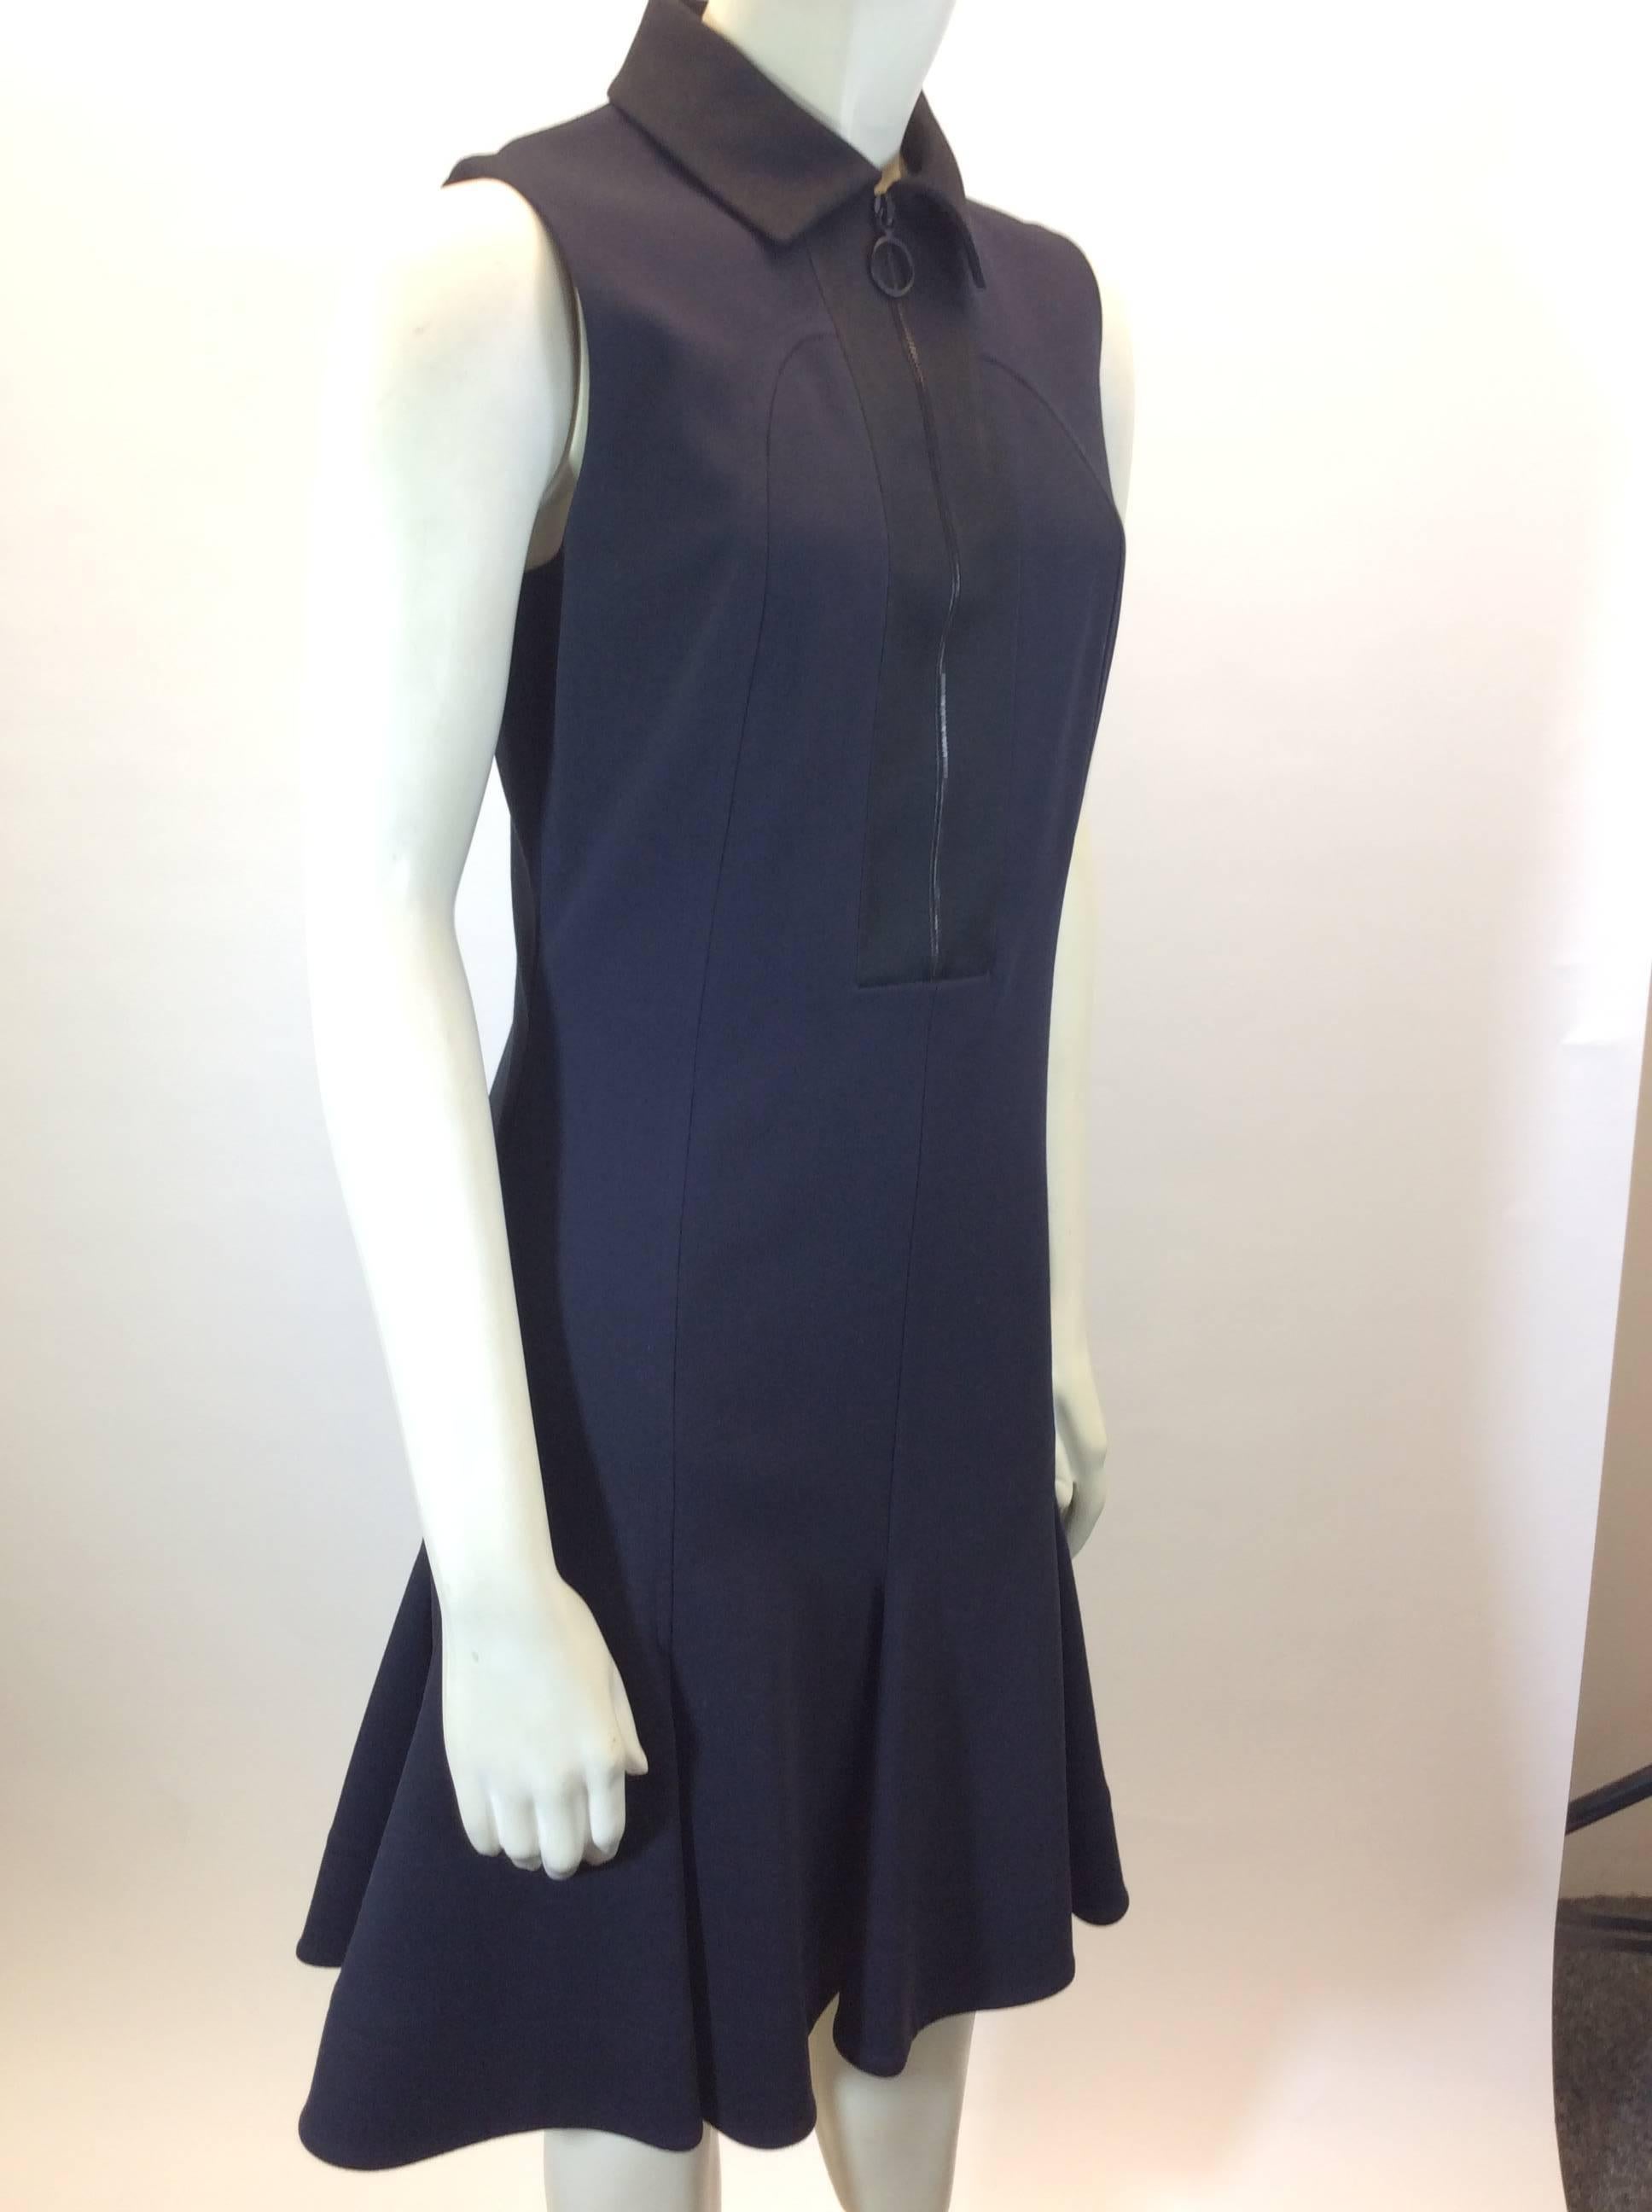 Akris Punto Dress 
-Size 6
-Lined
-Collared with Half zip
-Fit and flare waist
